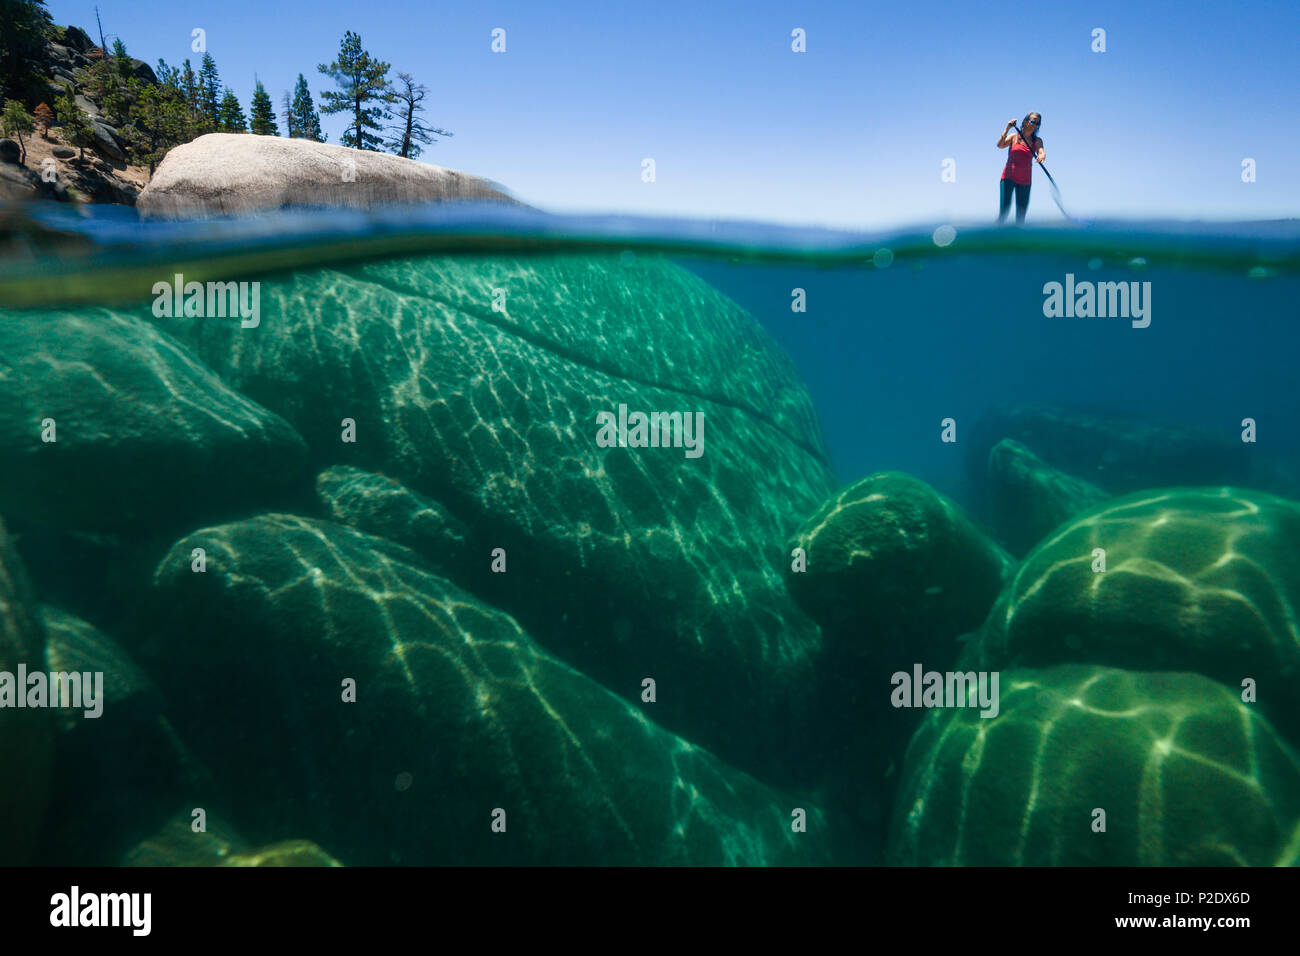 Woman doing stand up paddleboarding in the crystal blue waters of Lake Tahoe, Nevada shot half underwater and half above. Stock Photo